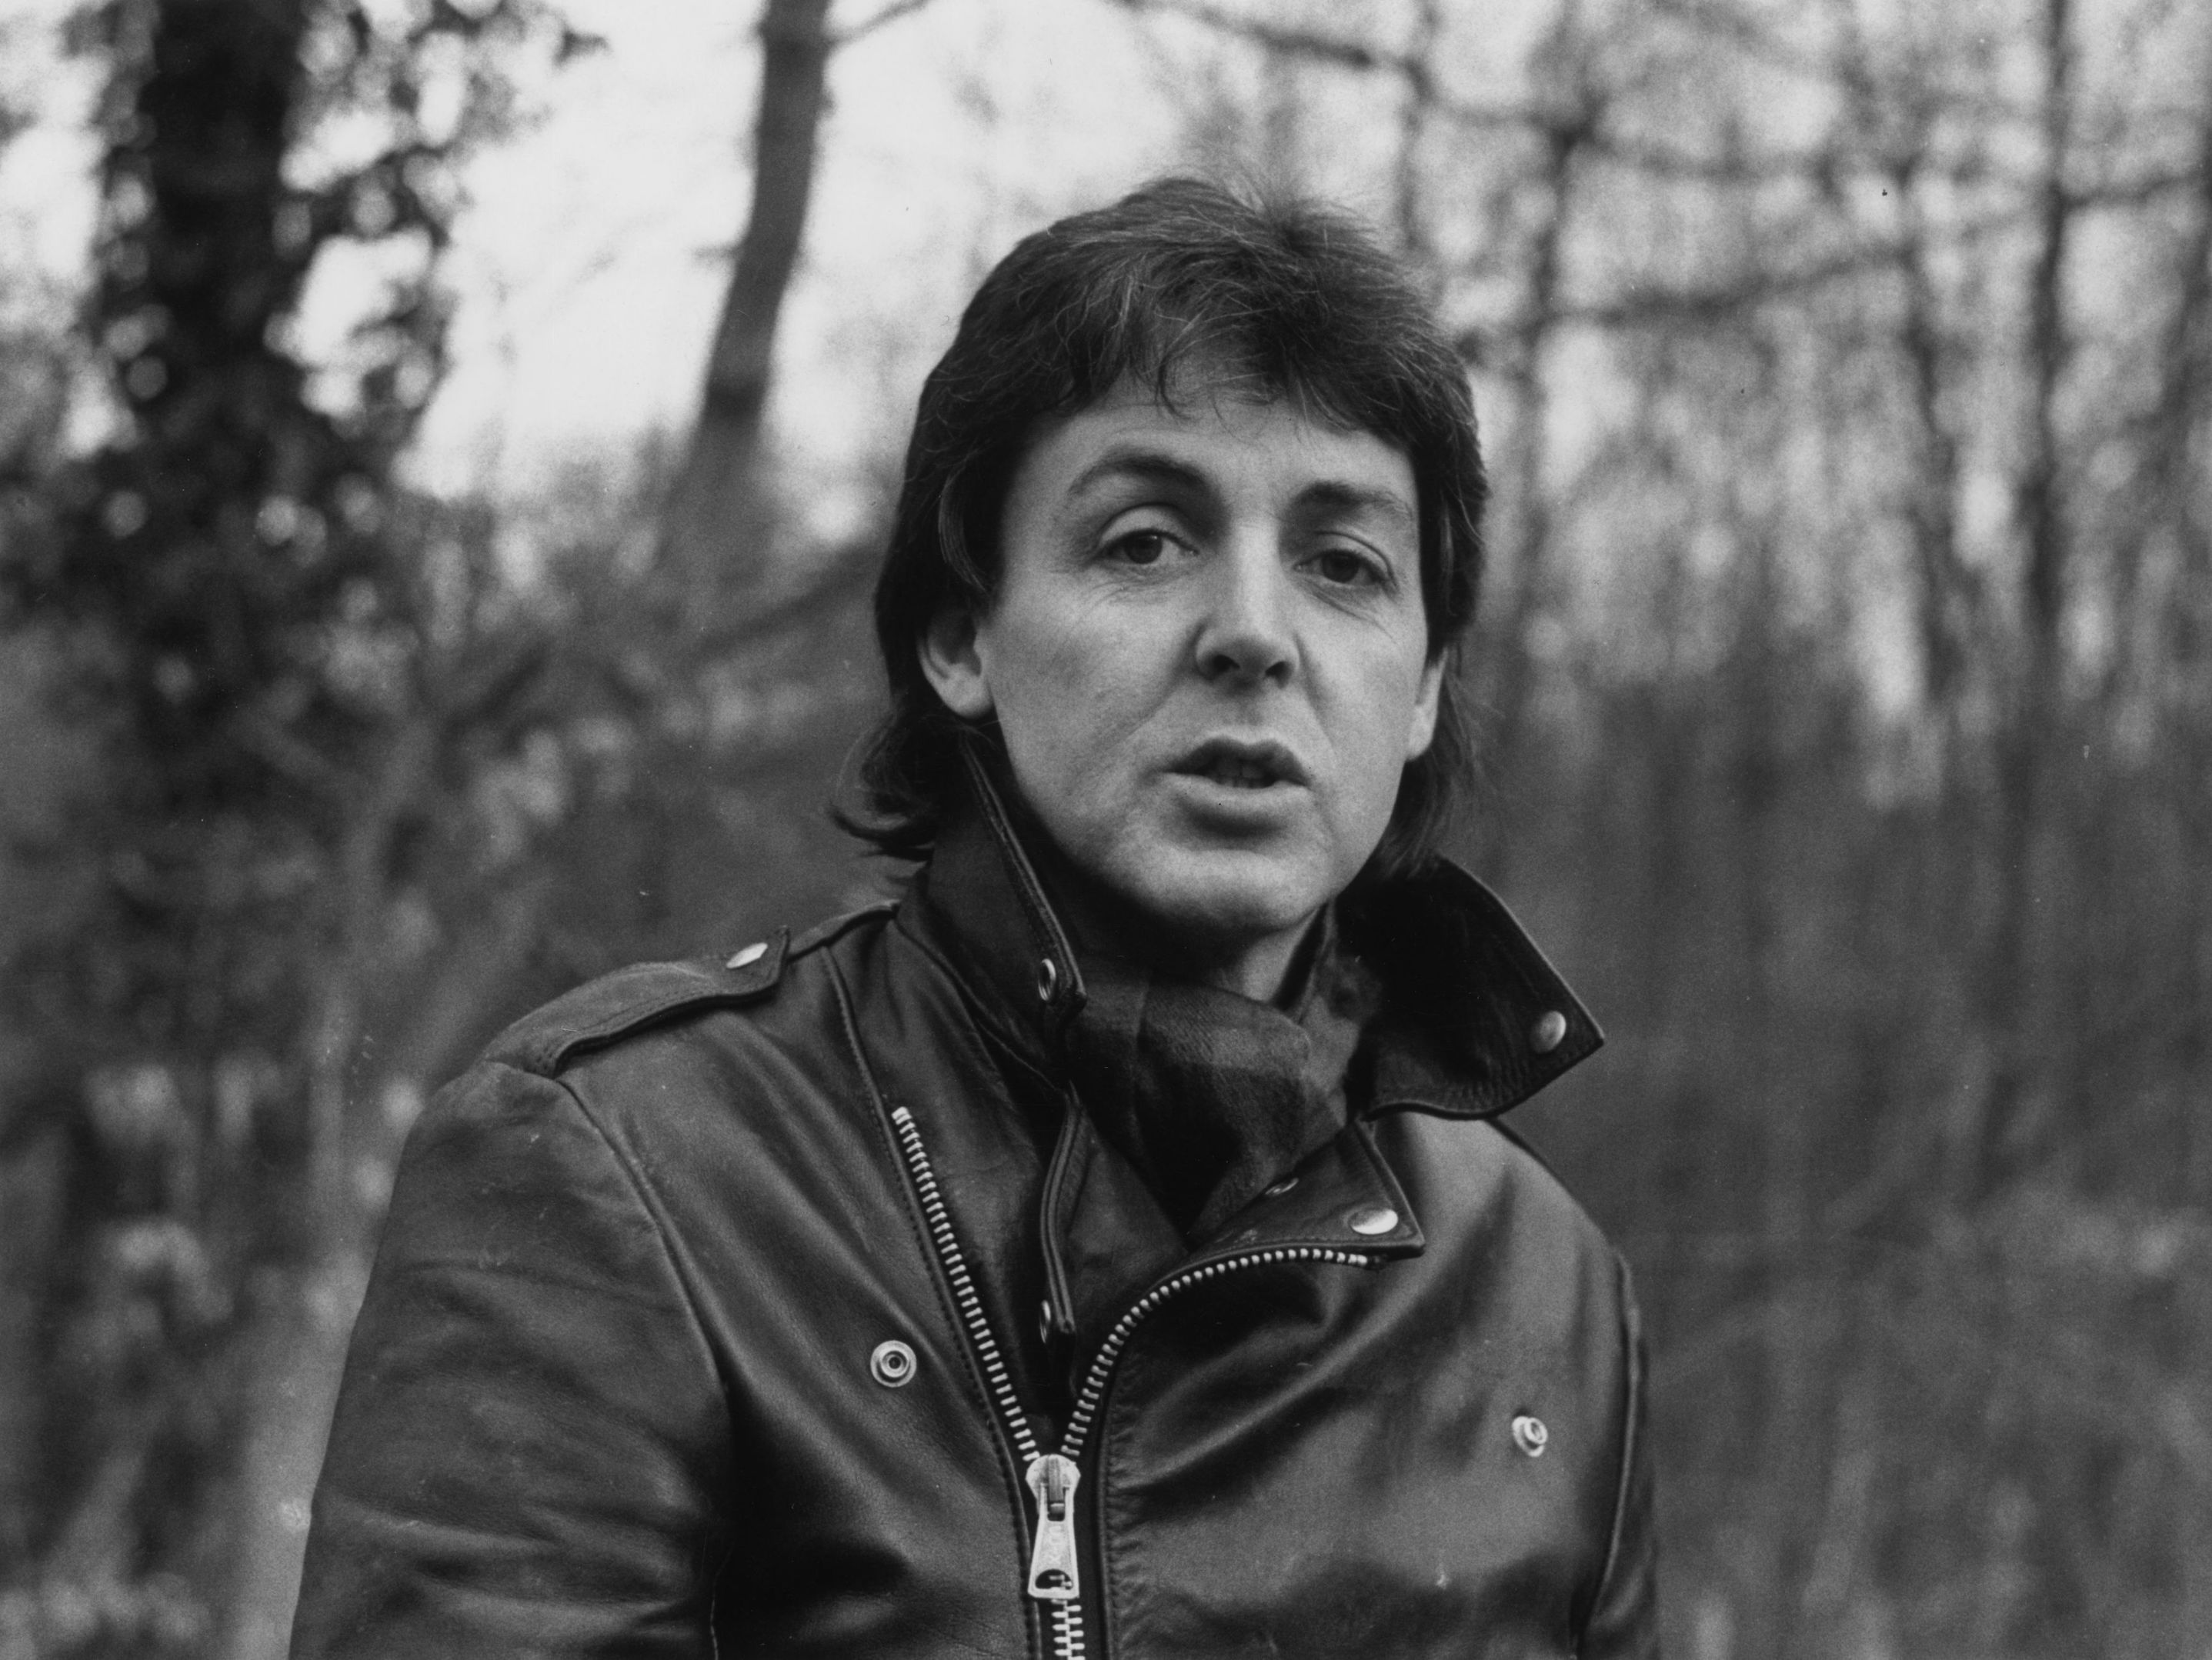 Paul McCartney on his farm in Sussex